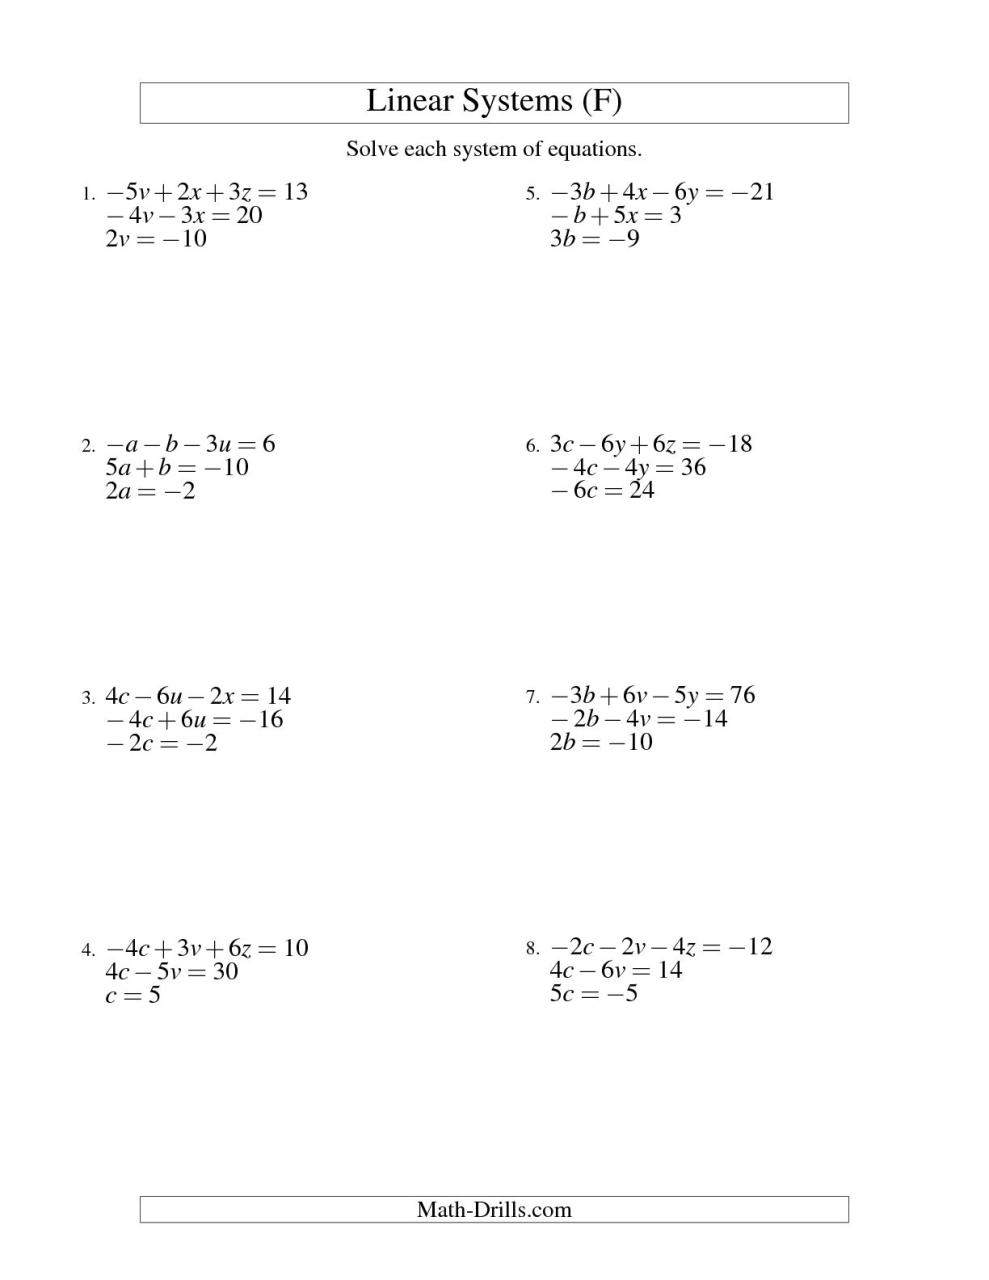 Solutions To Equations Worksheet Pdf